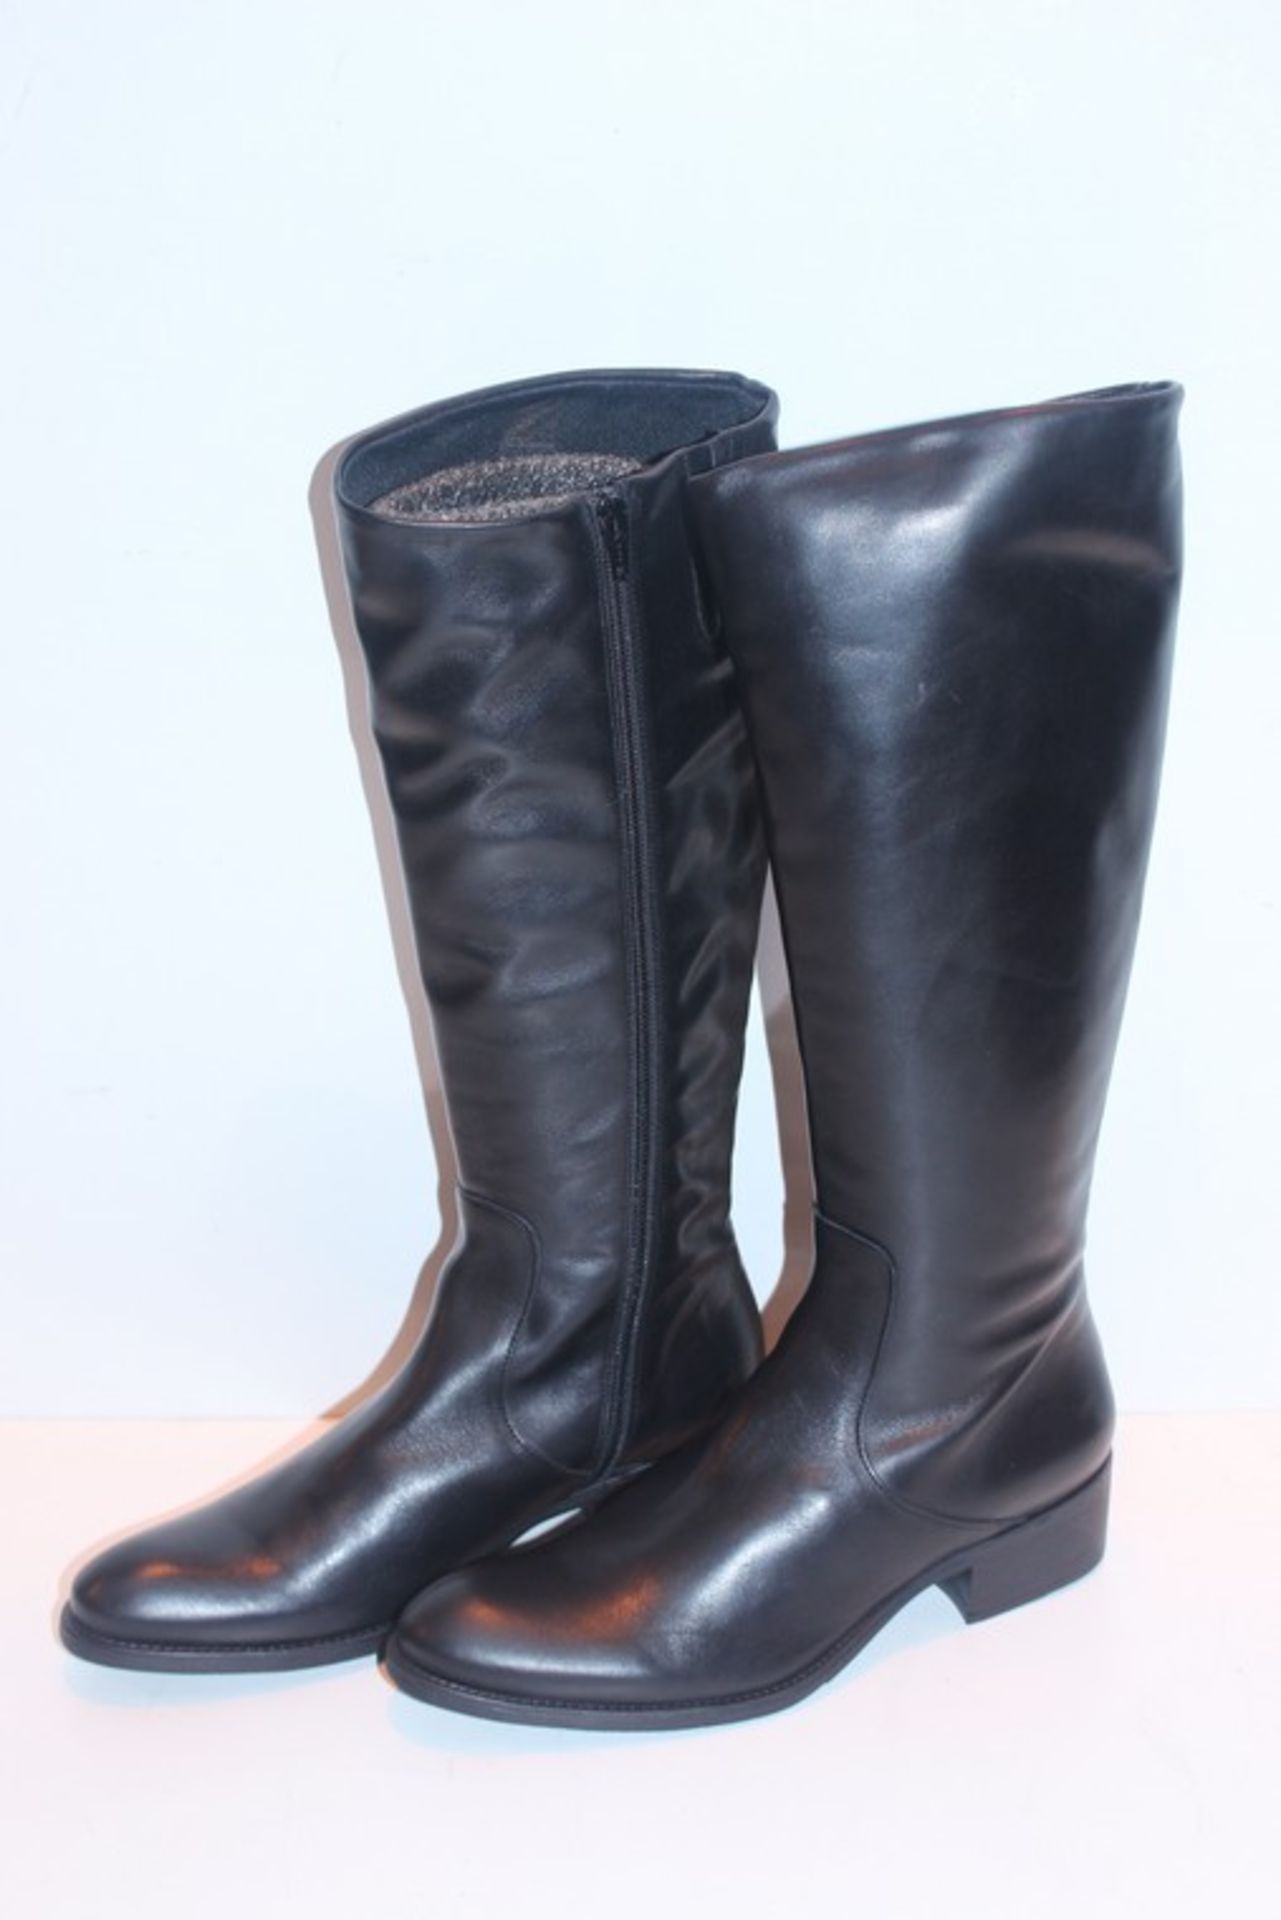 1 x BOXED PAIR OF TIROL BLACK LEATHER SIZE 7 WOMENS KNEE HIGH BOOTS RRP £150 (01.11.17) (3909720) *